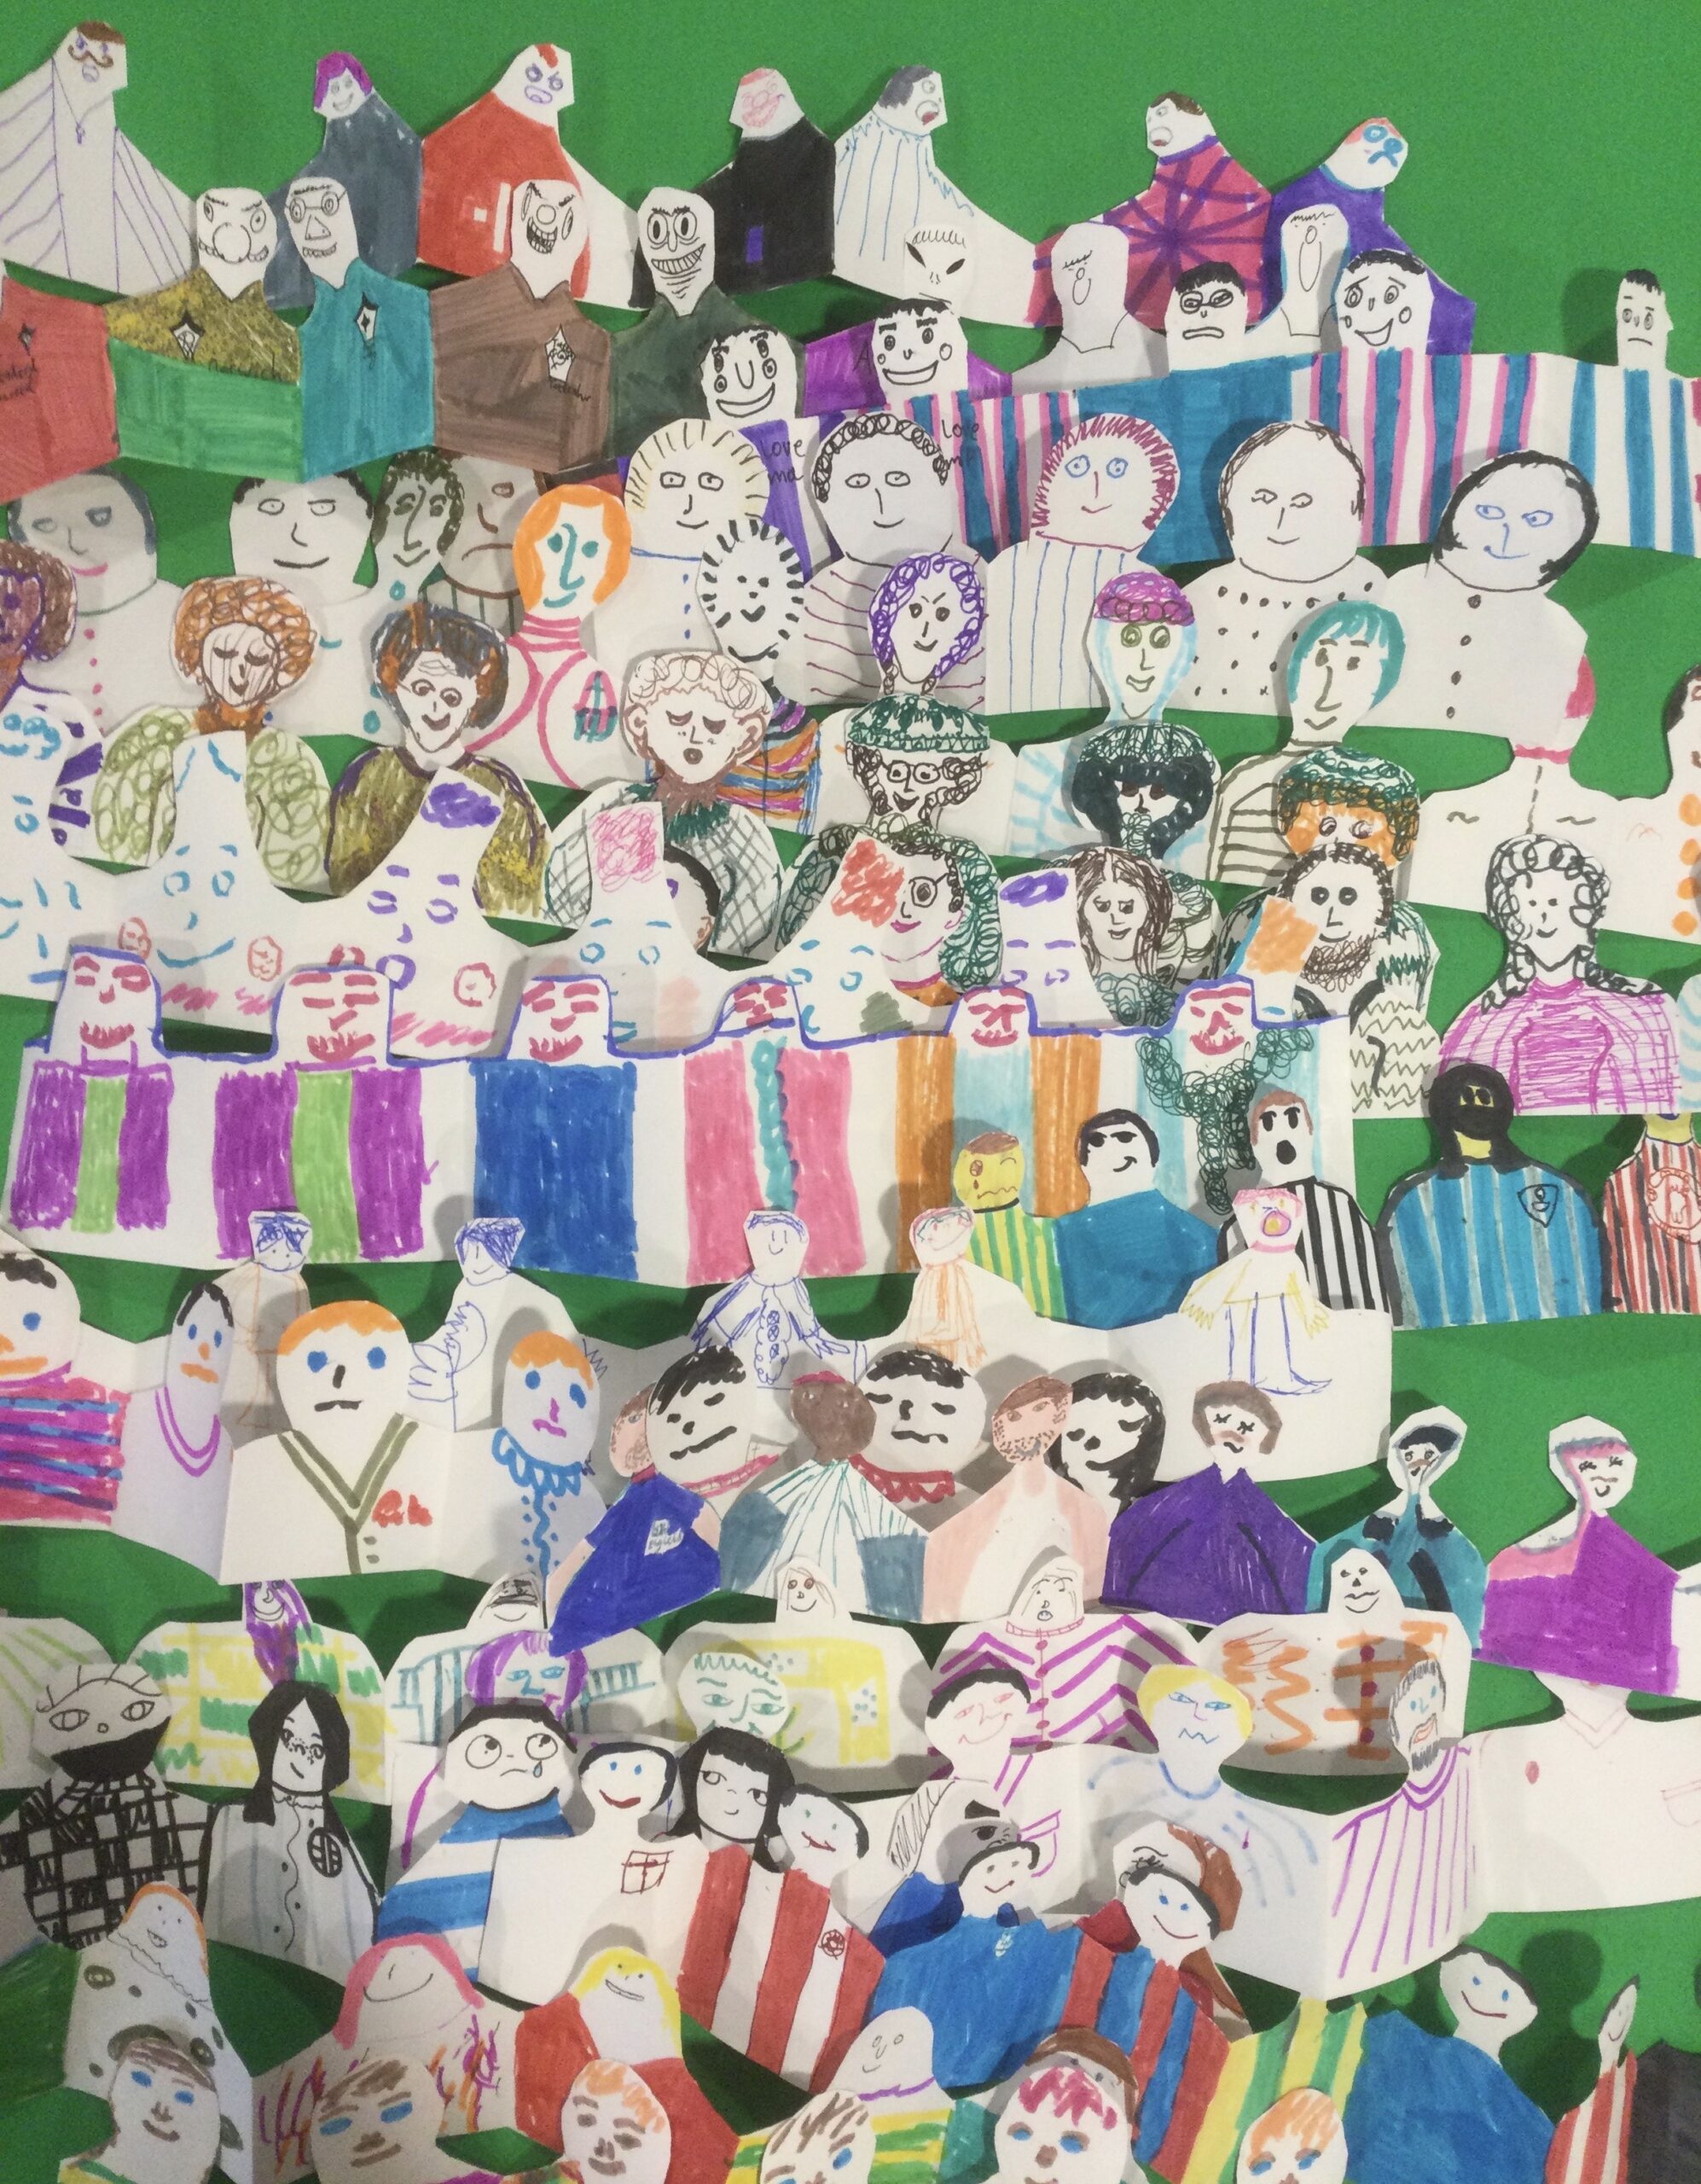 Rows of colourful cut-out paper figures on a green background